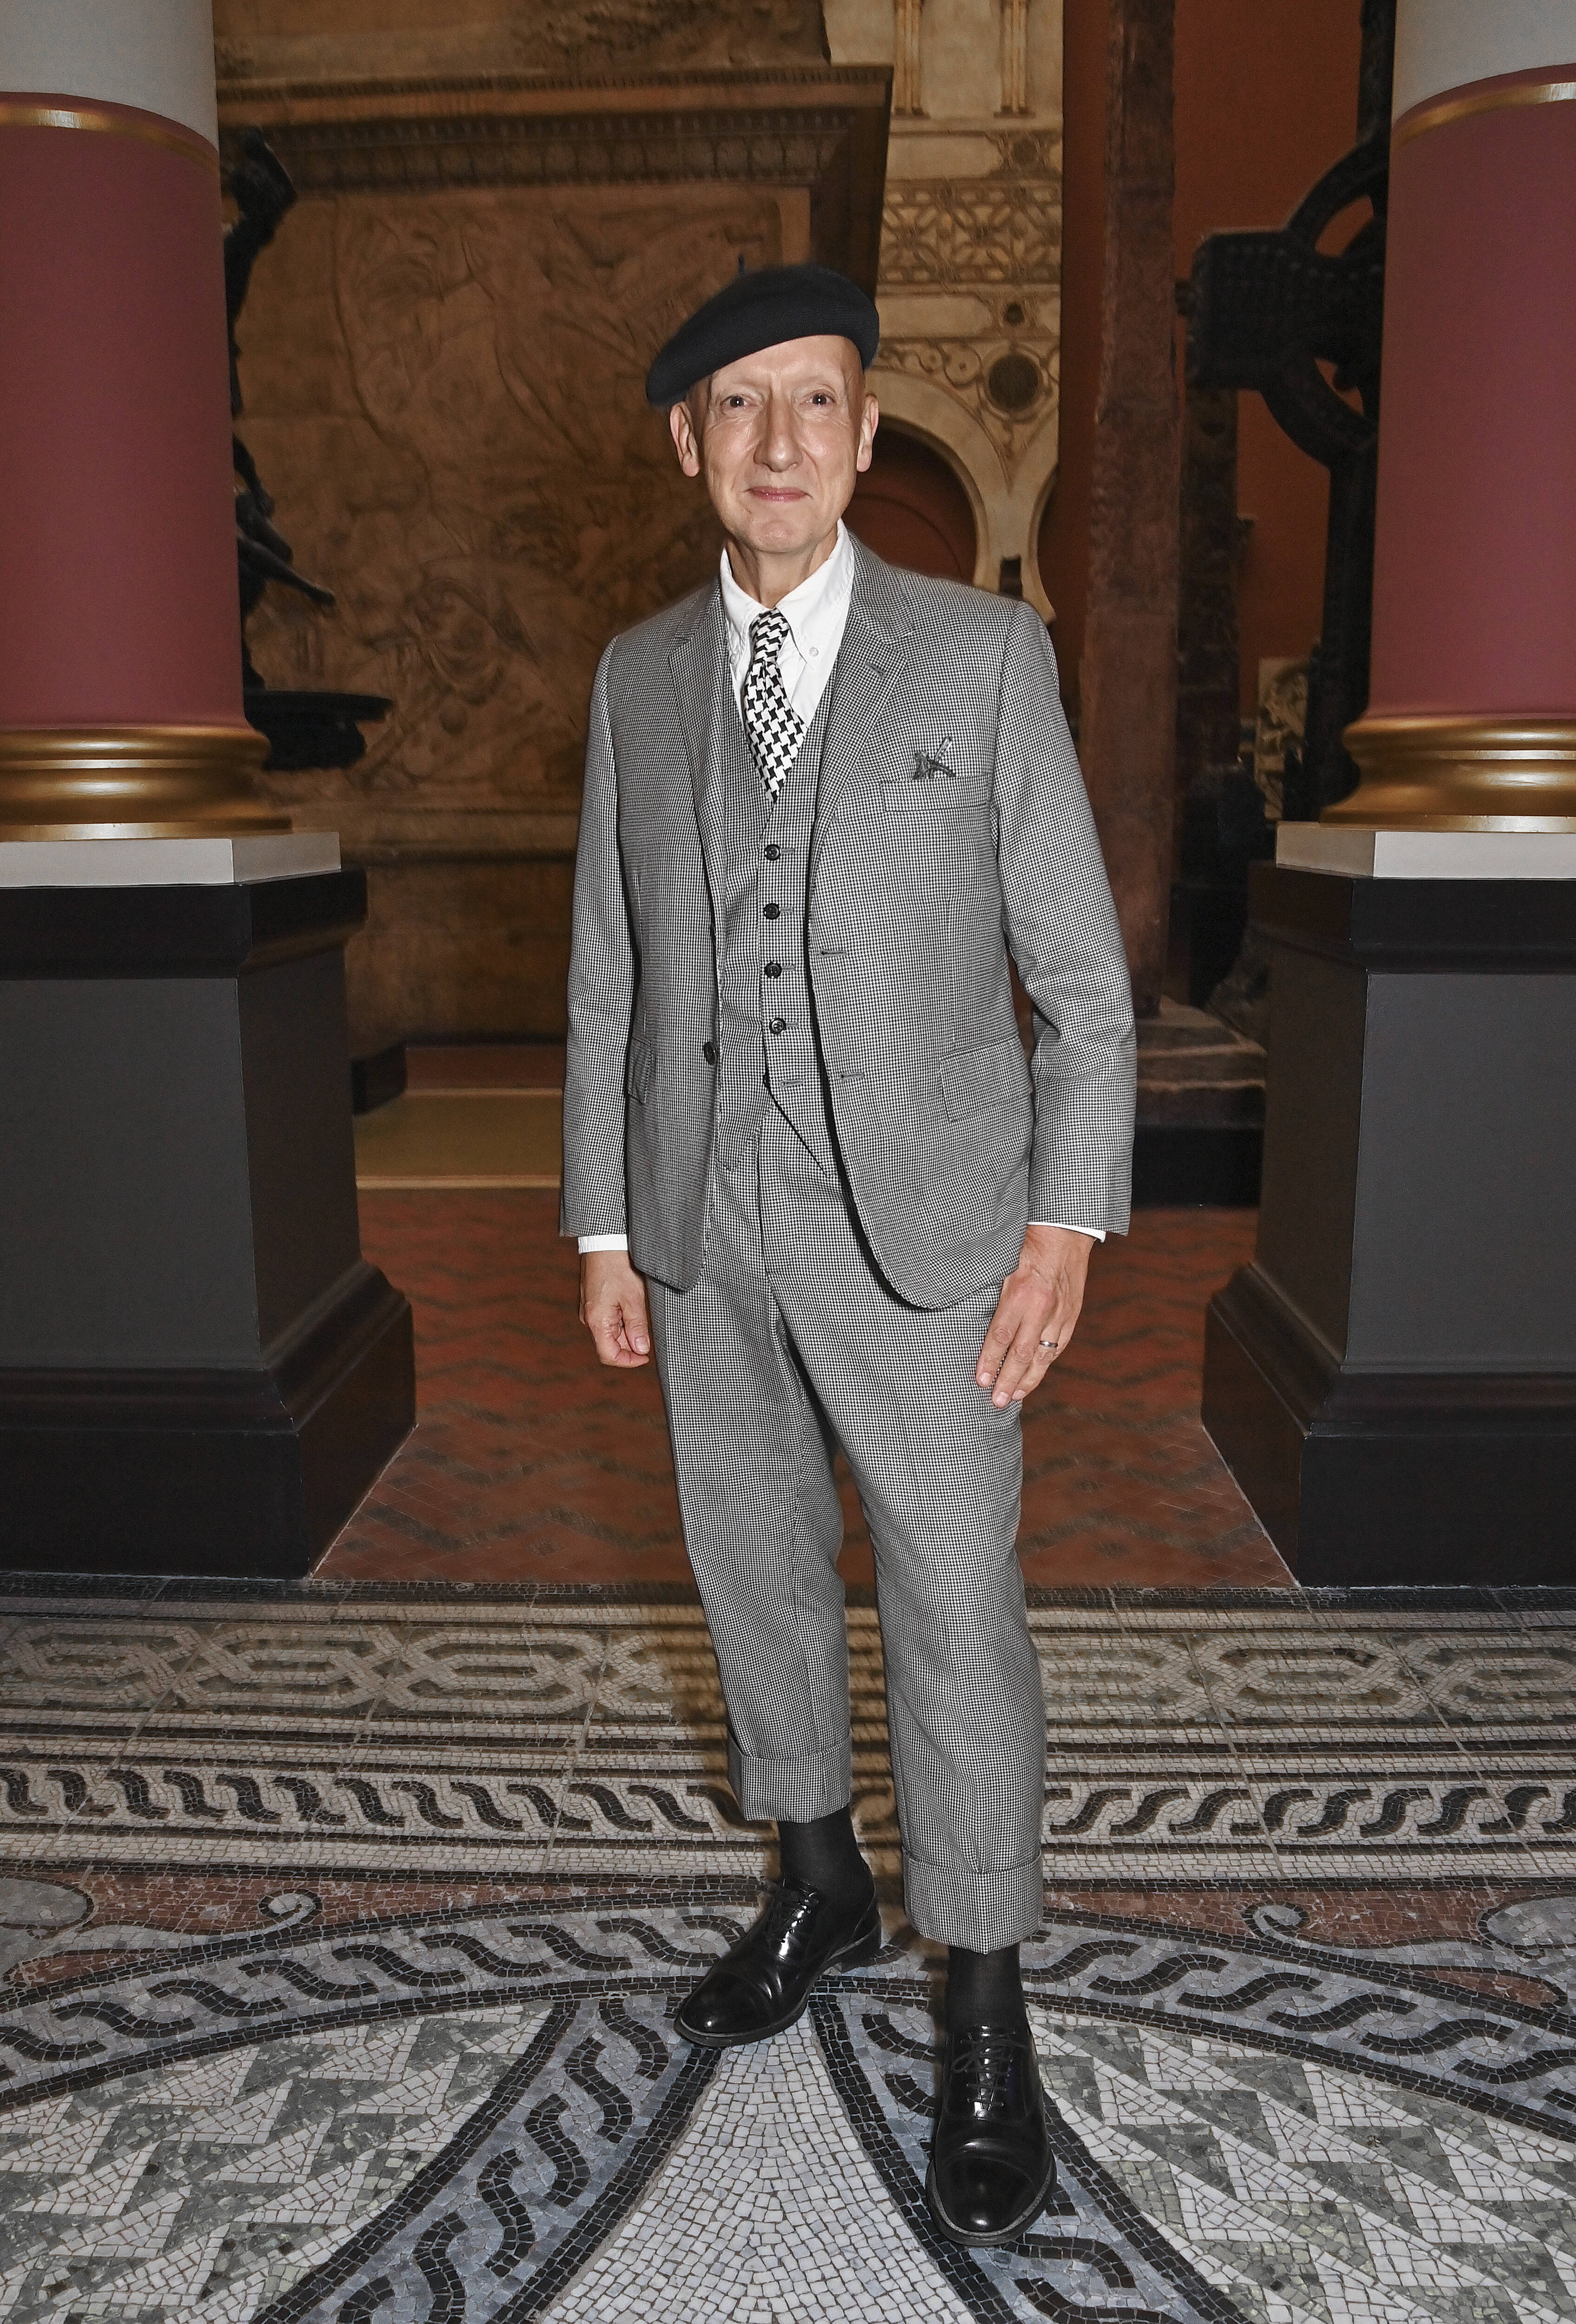 Shows, shoes, and suits - Thom Browne on designing for the future after 20 years in business